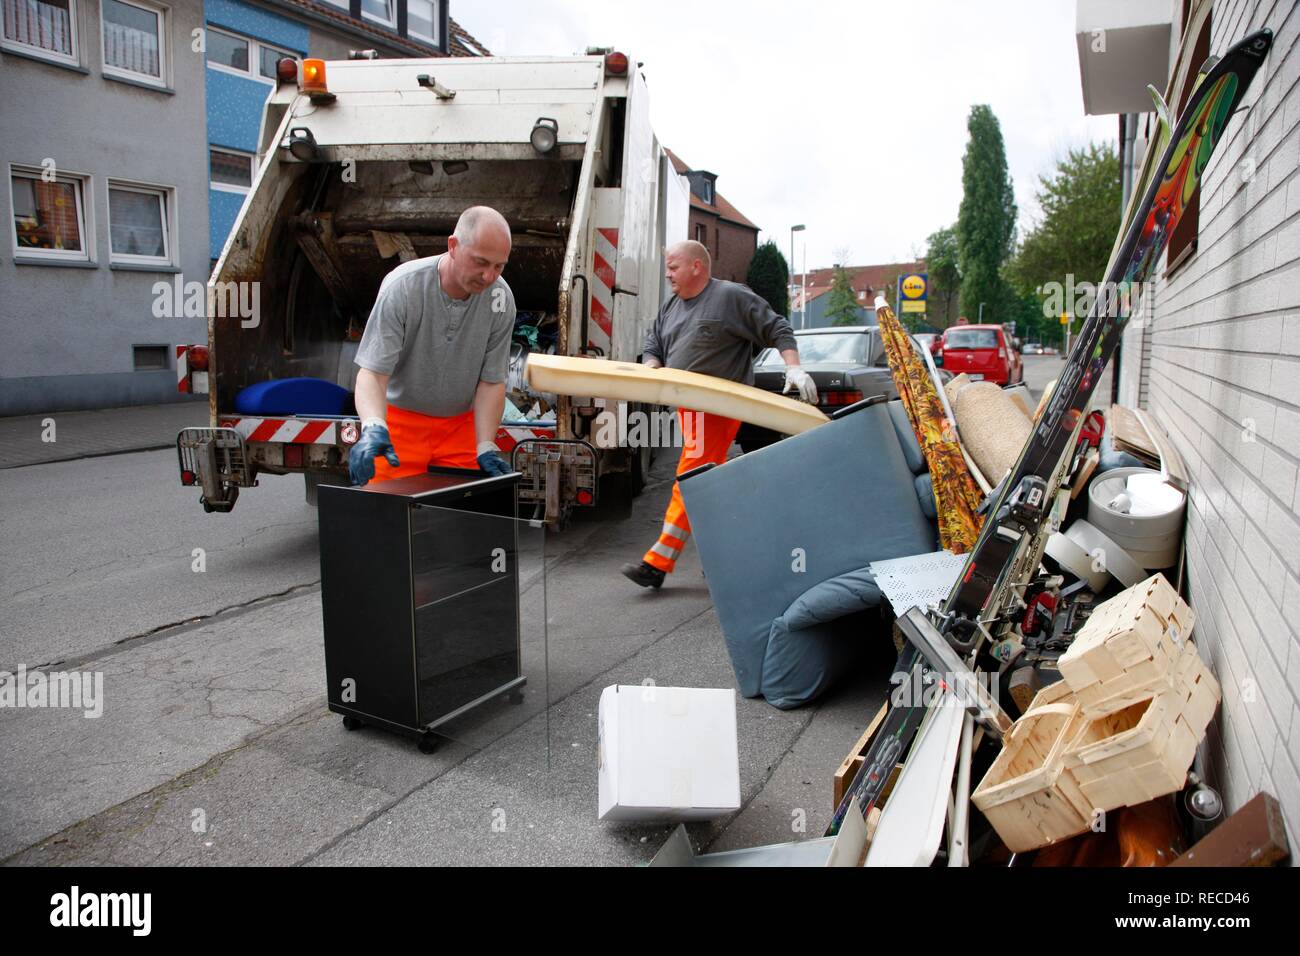 Refuse collection, bulky waste being collected, Gelsendienste, Gelsenkirchens public utility company, North Rhine-Westphalia Stock Photo